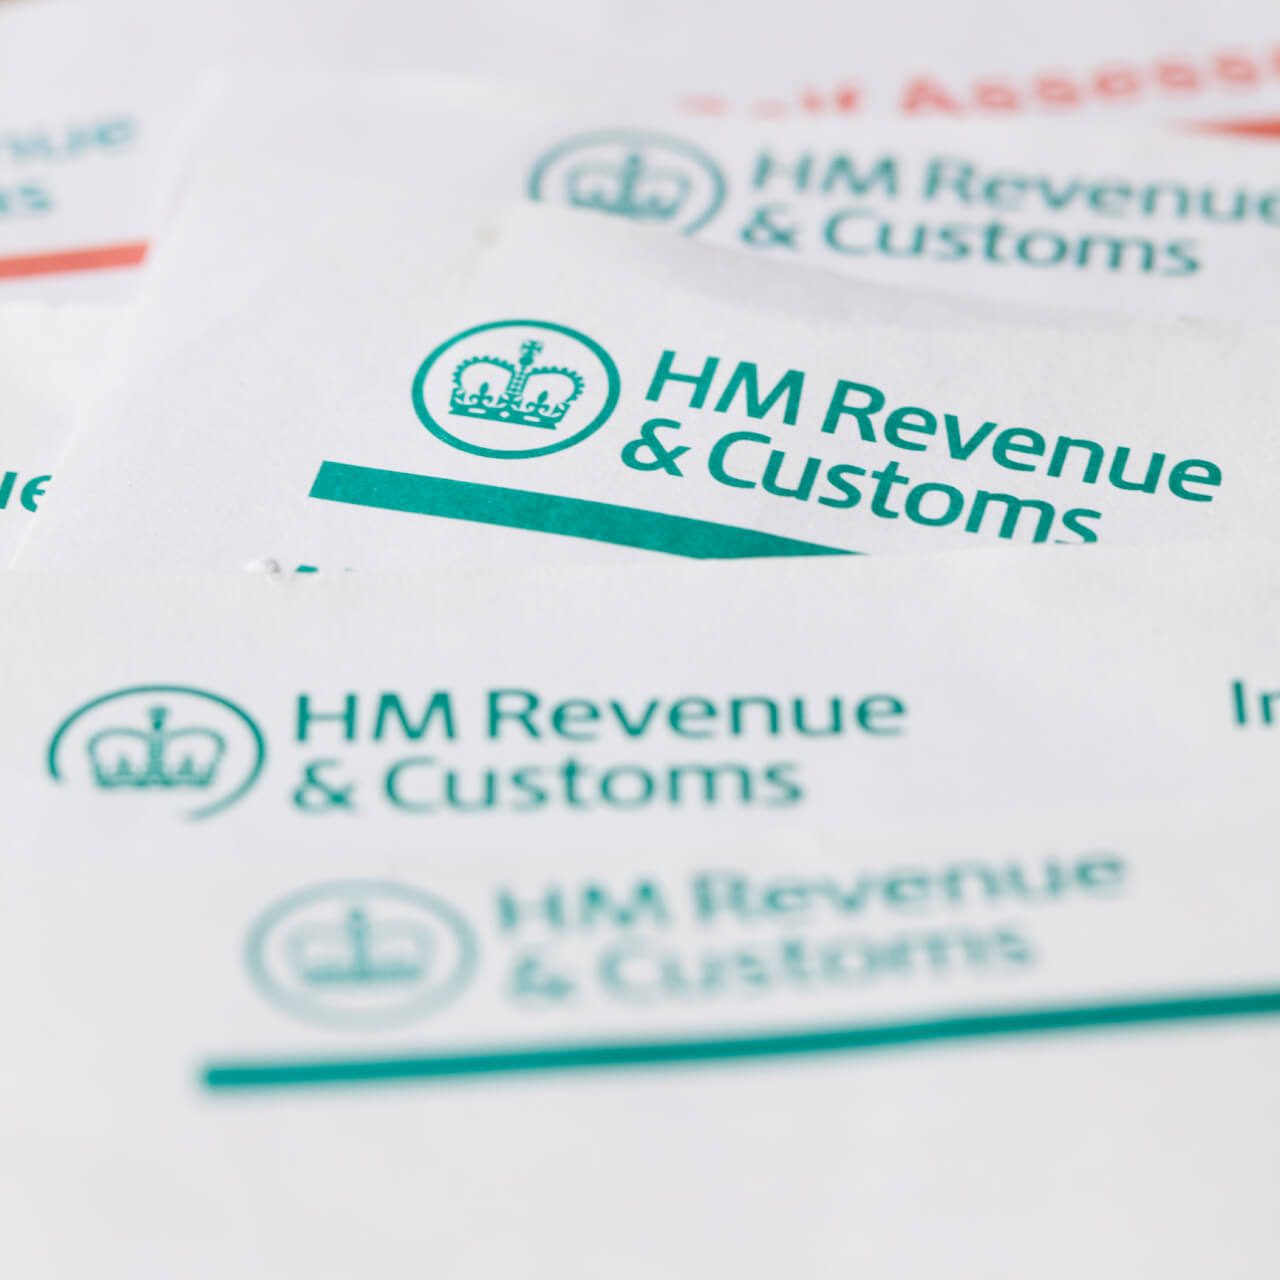 Retrospective changes proposed to HMRC HICBC Discovery Assessment Powers